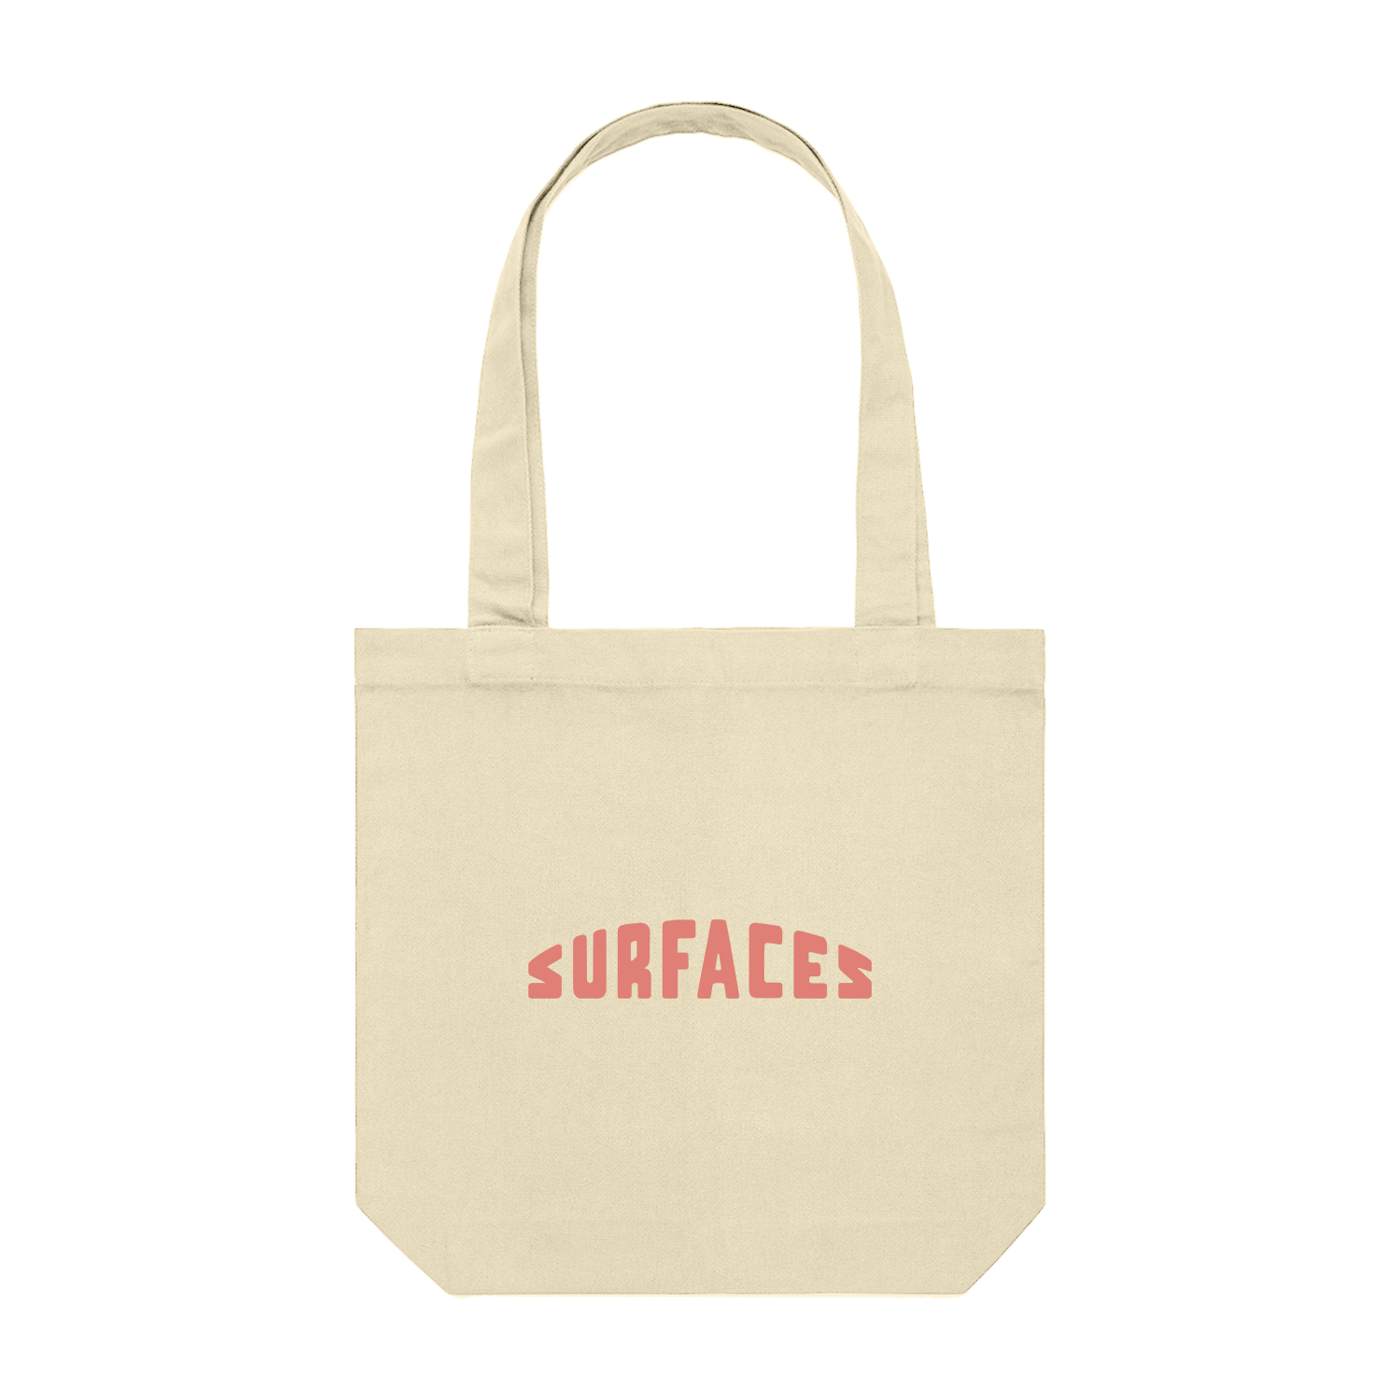 Surfaces Tote Bag